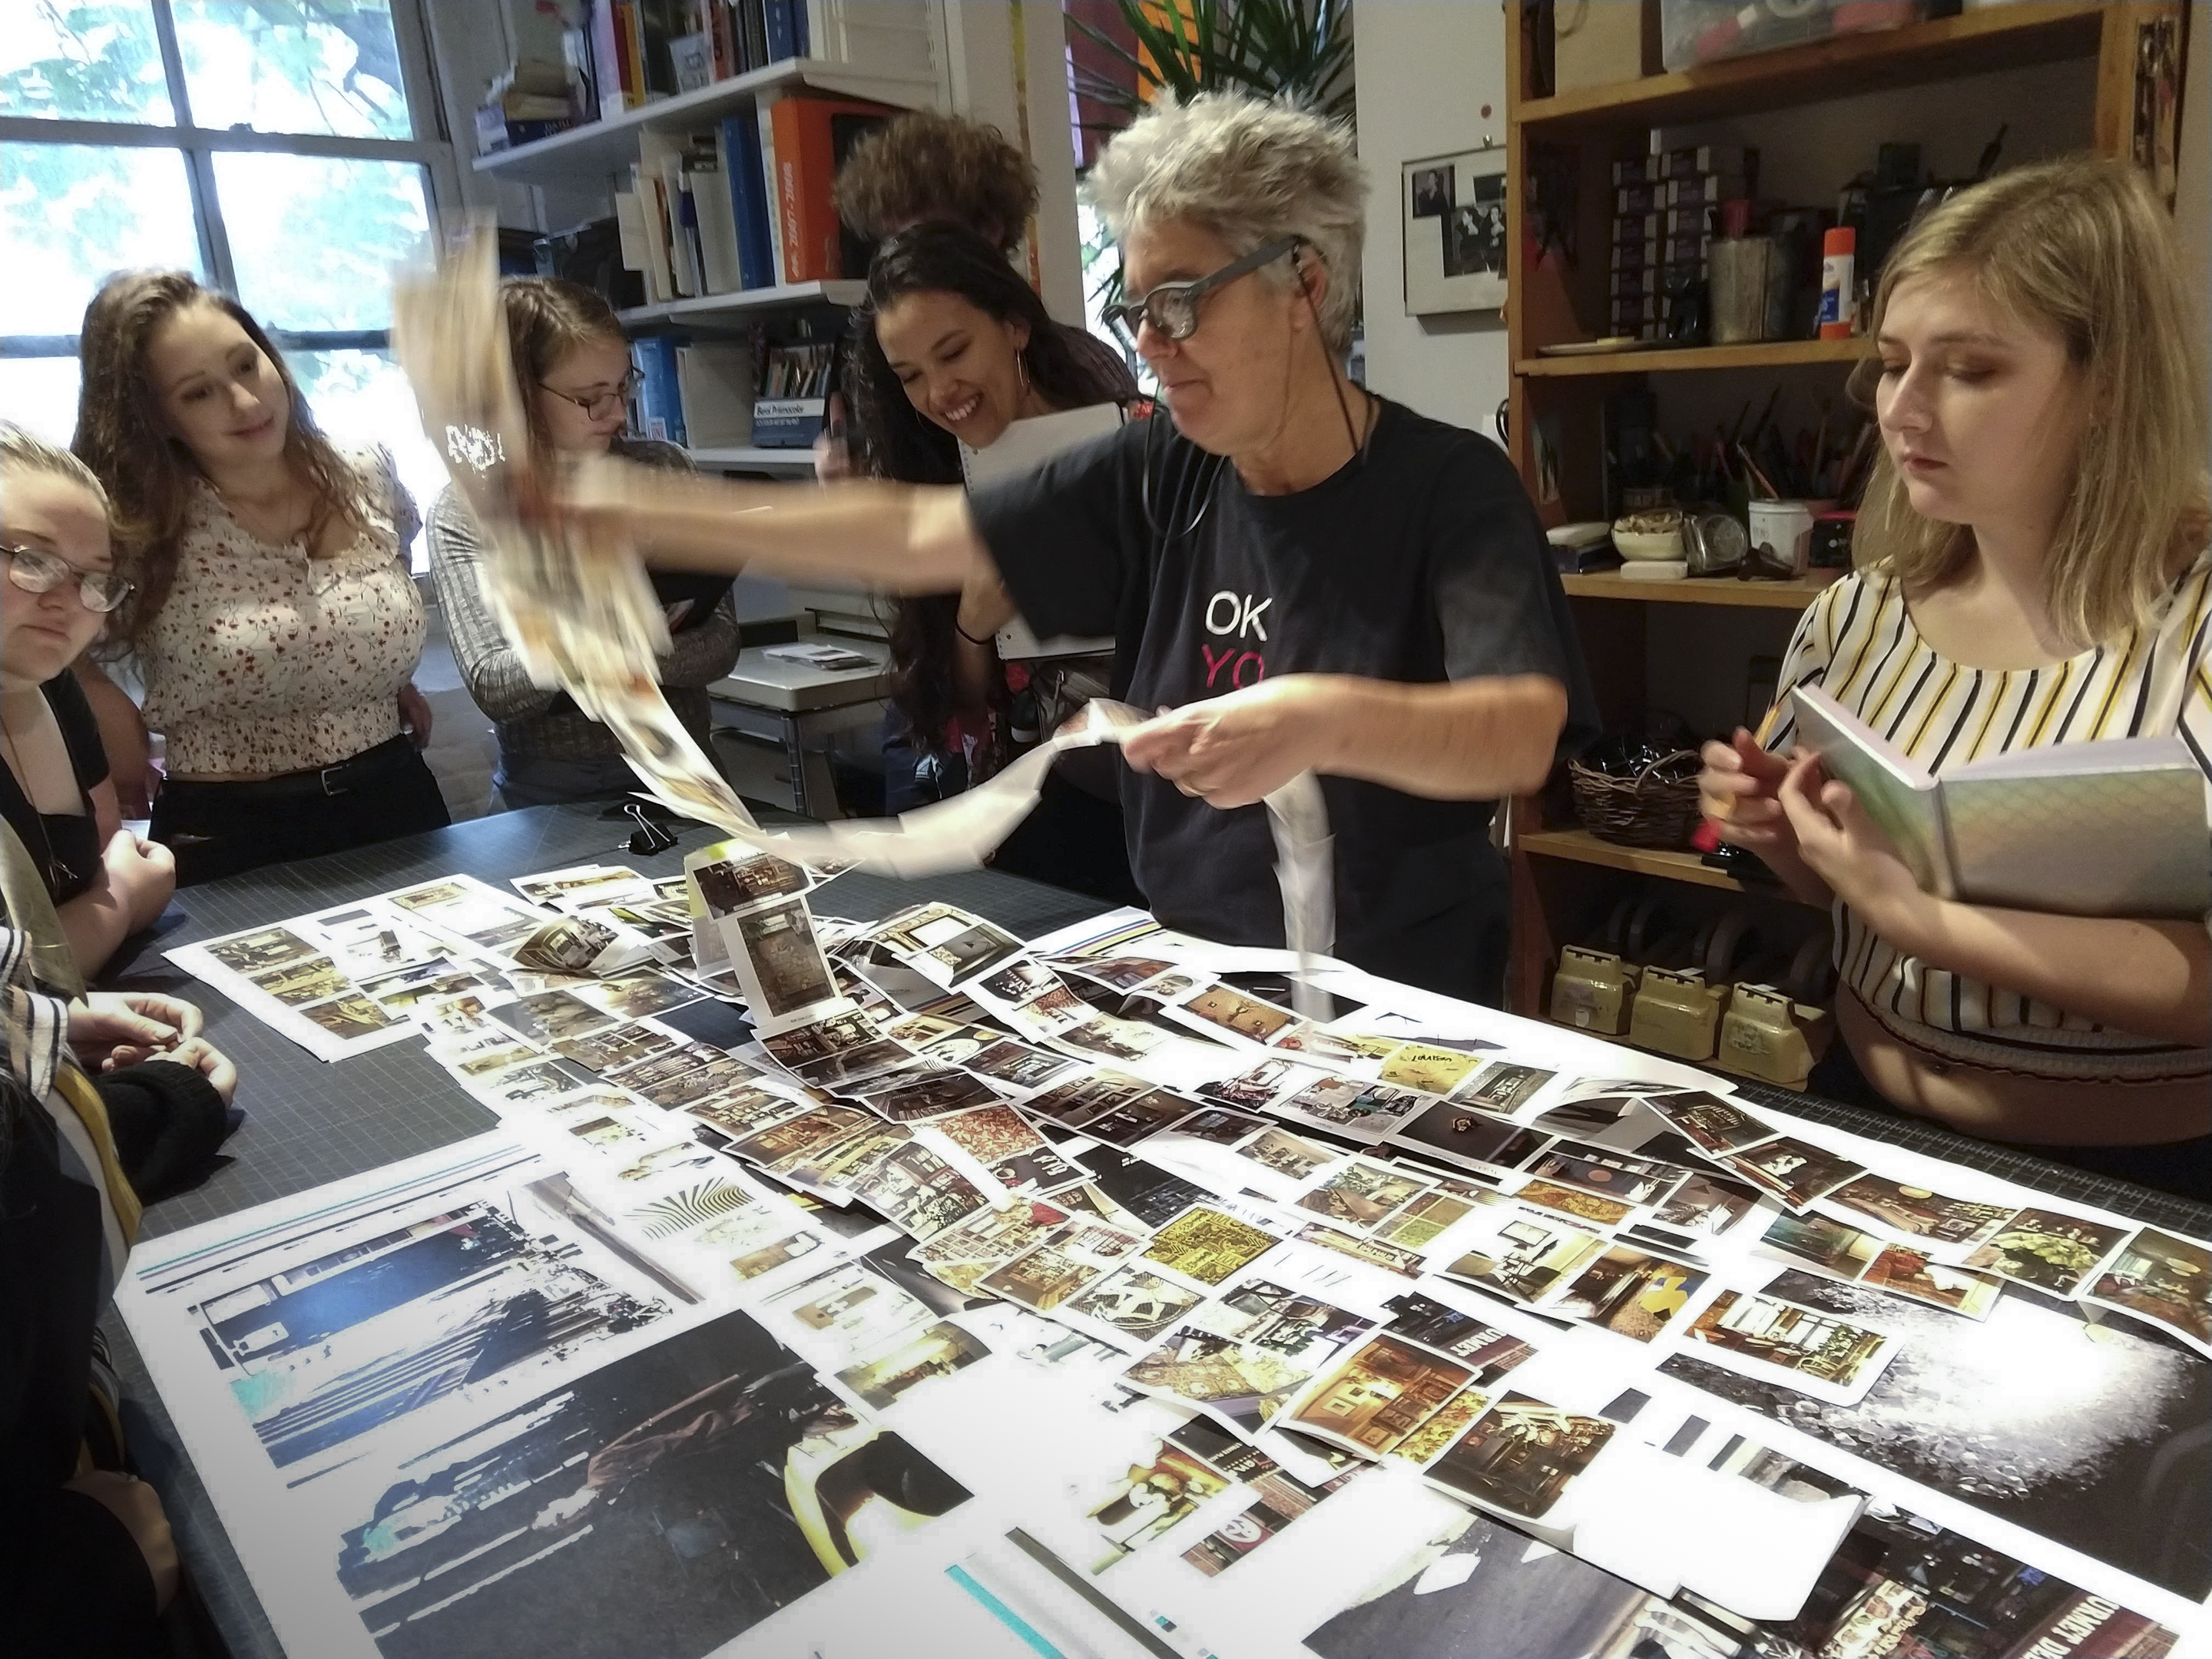 Book designer Yolanda Cuomo shows the students how she edits and sequences a book in her studio in Chelsea.